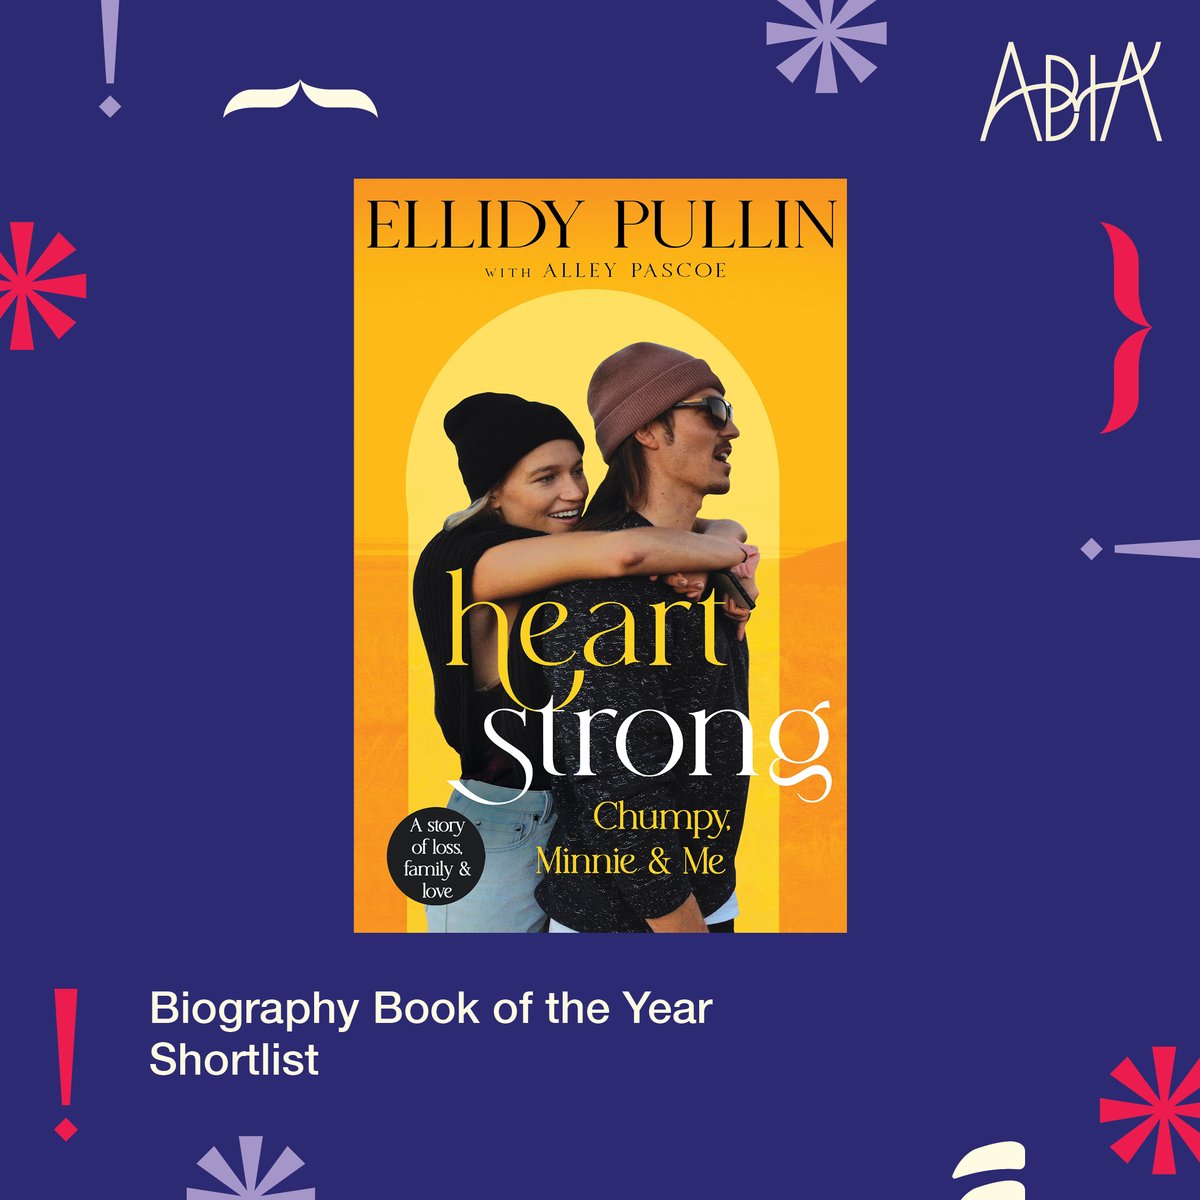 Congratulations #EllidyPullin and @AlleyPascoe for #Heartstrong being shortlisted for Biography Book of the Year at the 2023 @ABIA_Awards! 😍 #ABIA2023 Read more about this incredible book here: bit.ly/Heartstrong_HAU